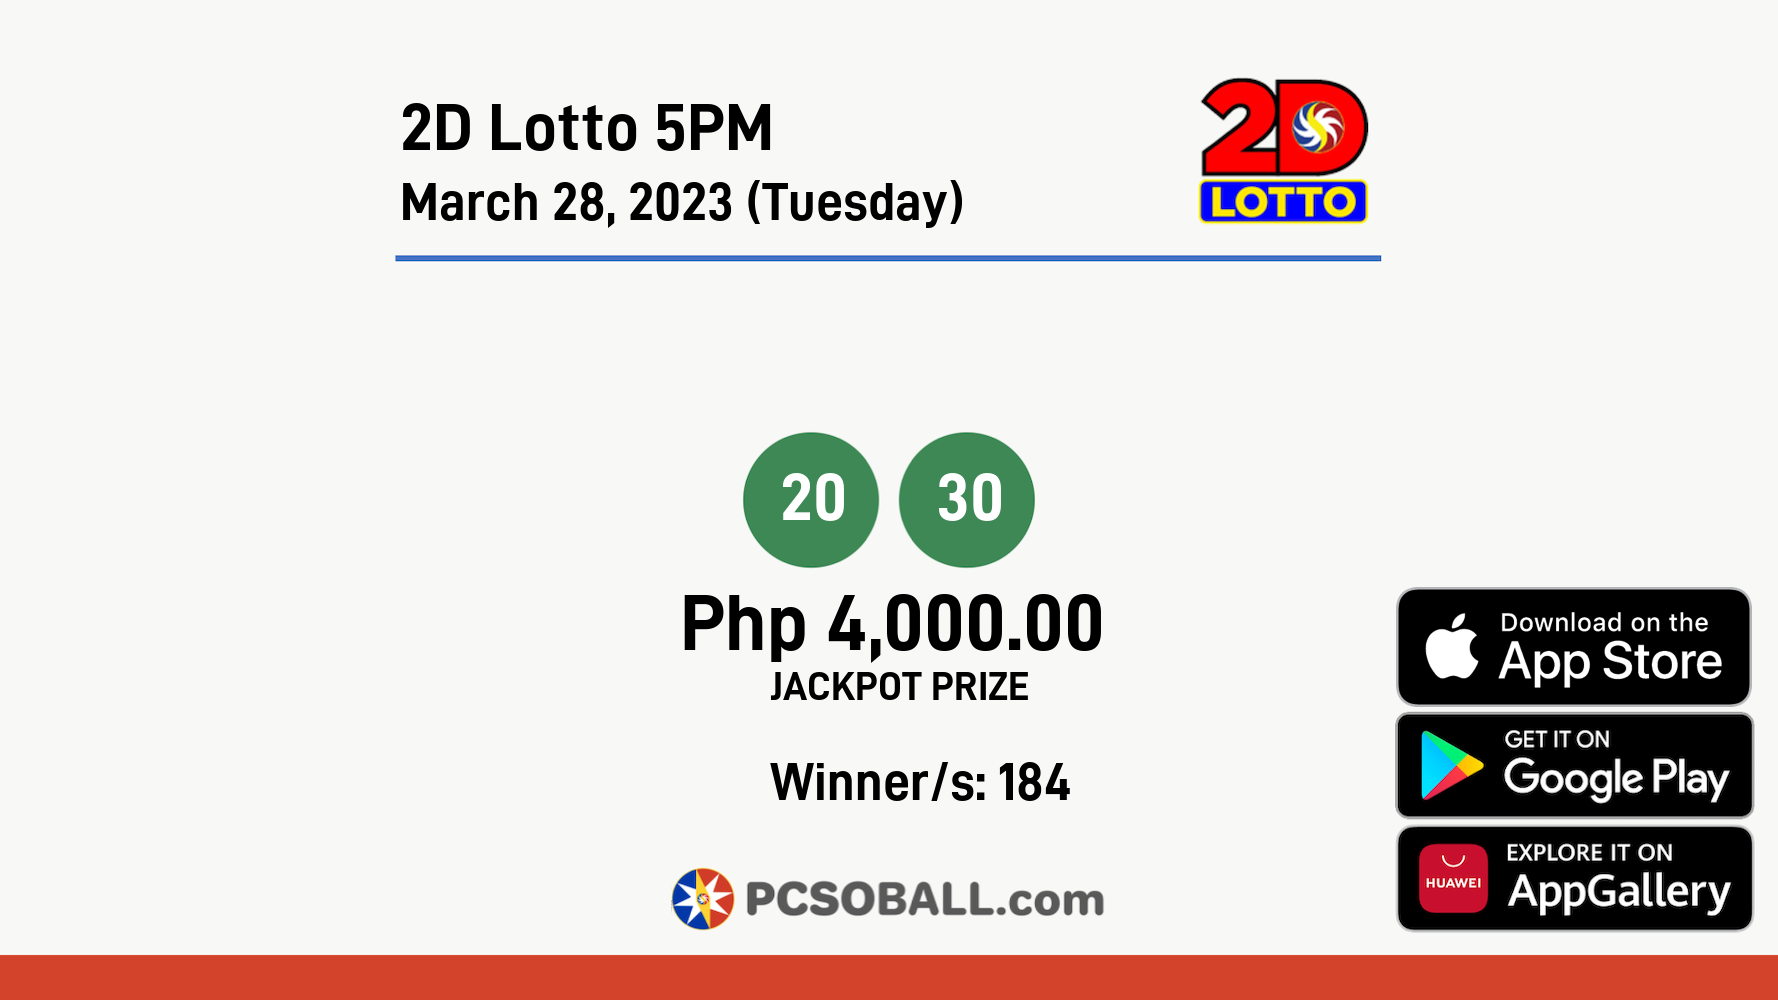 2D Lotto 5PM March 28, 2023 (Tuesday) Result